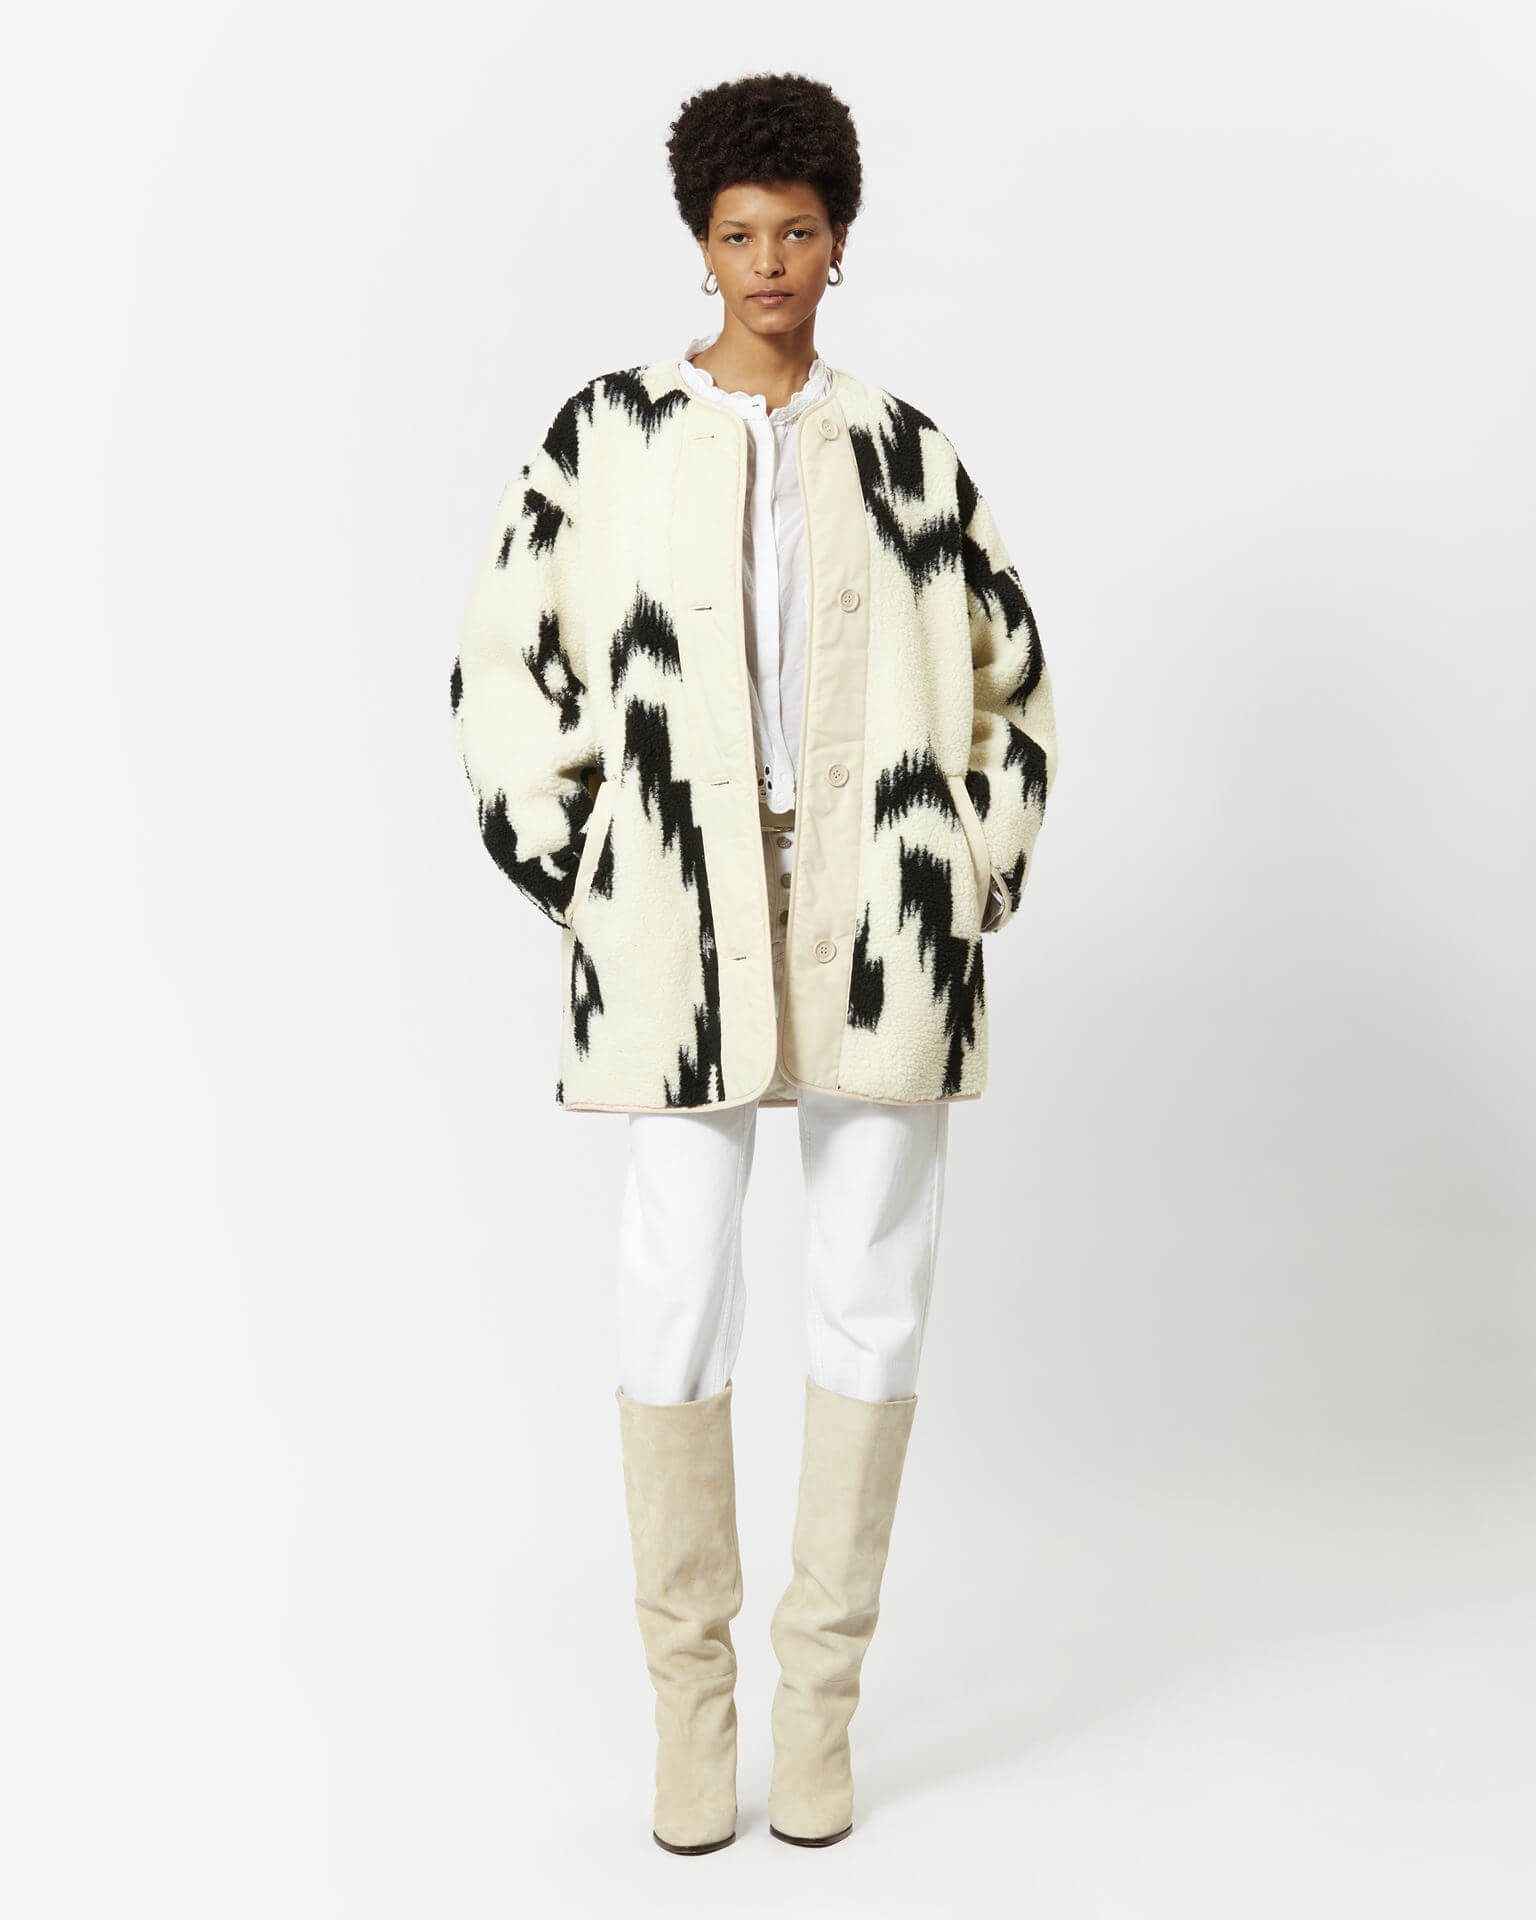 Isabel Marant Himemma Coat in Ecru and Black from The New Trend